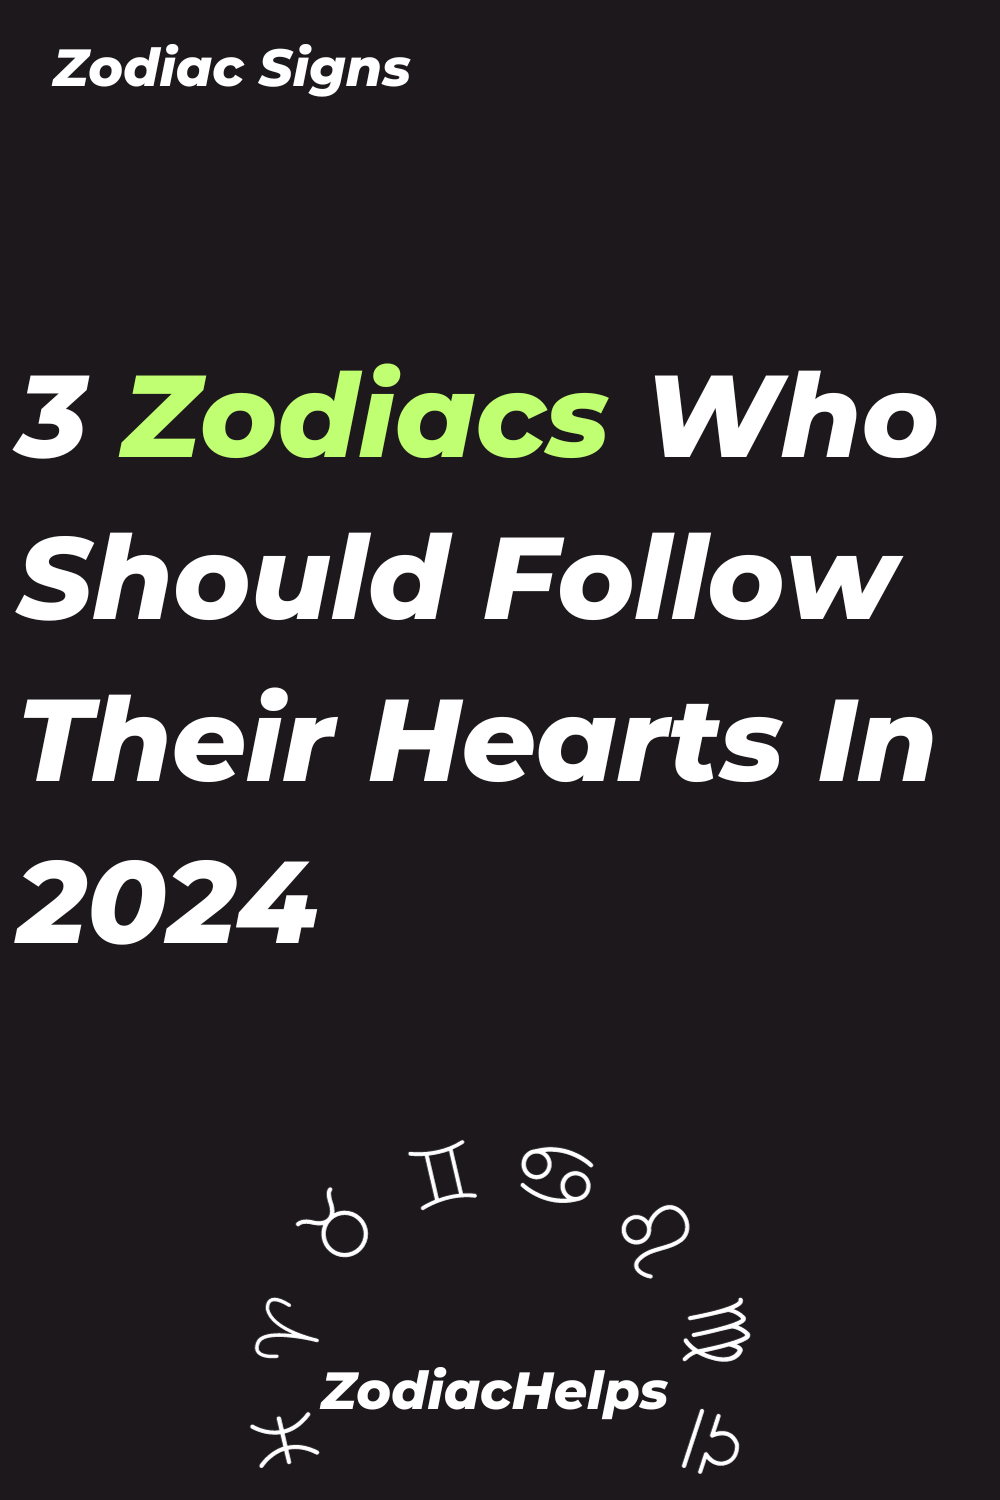 3 Zodiacs Who Should Follow Their Hearts In 2024